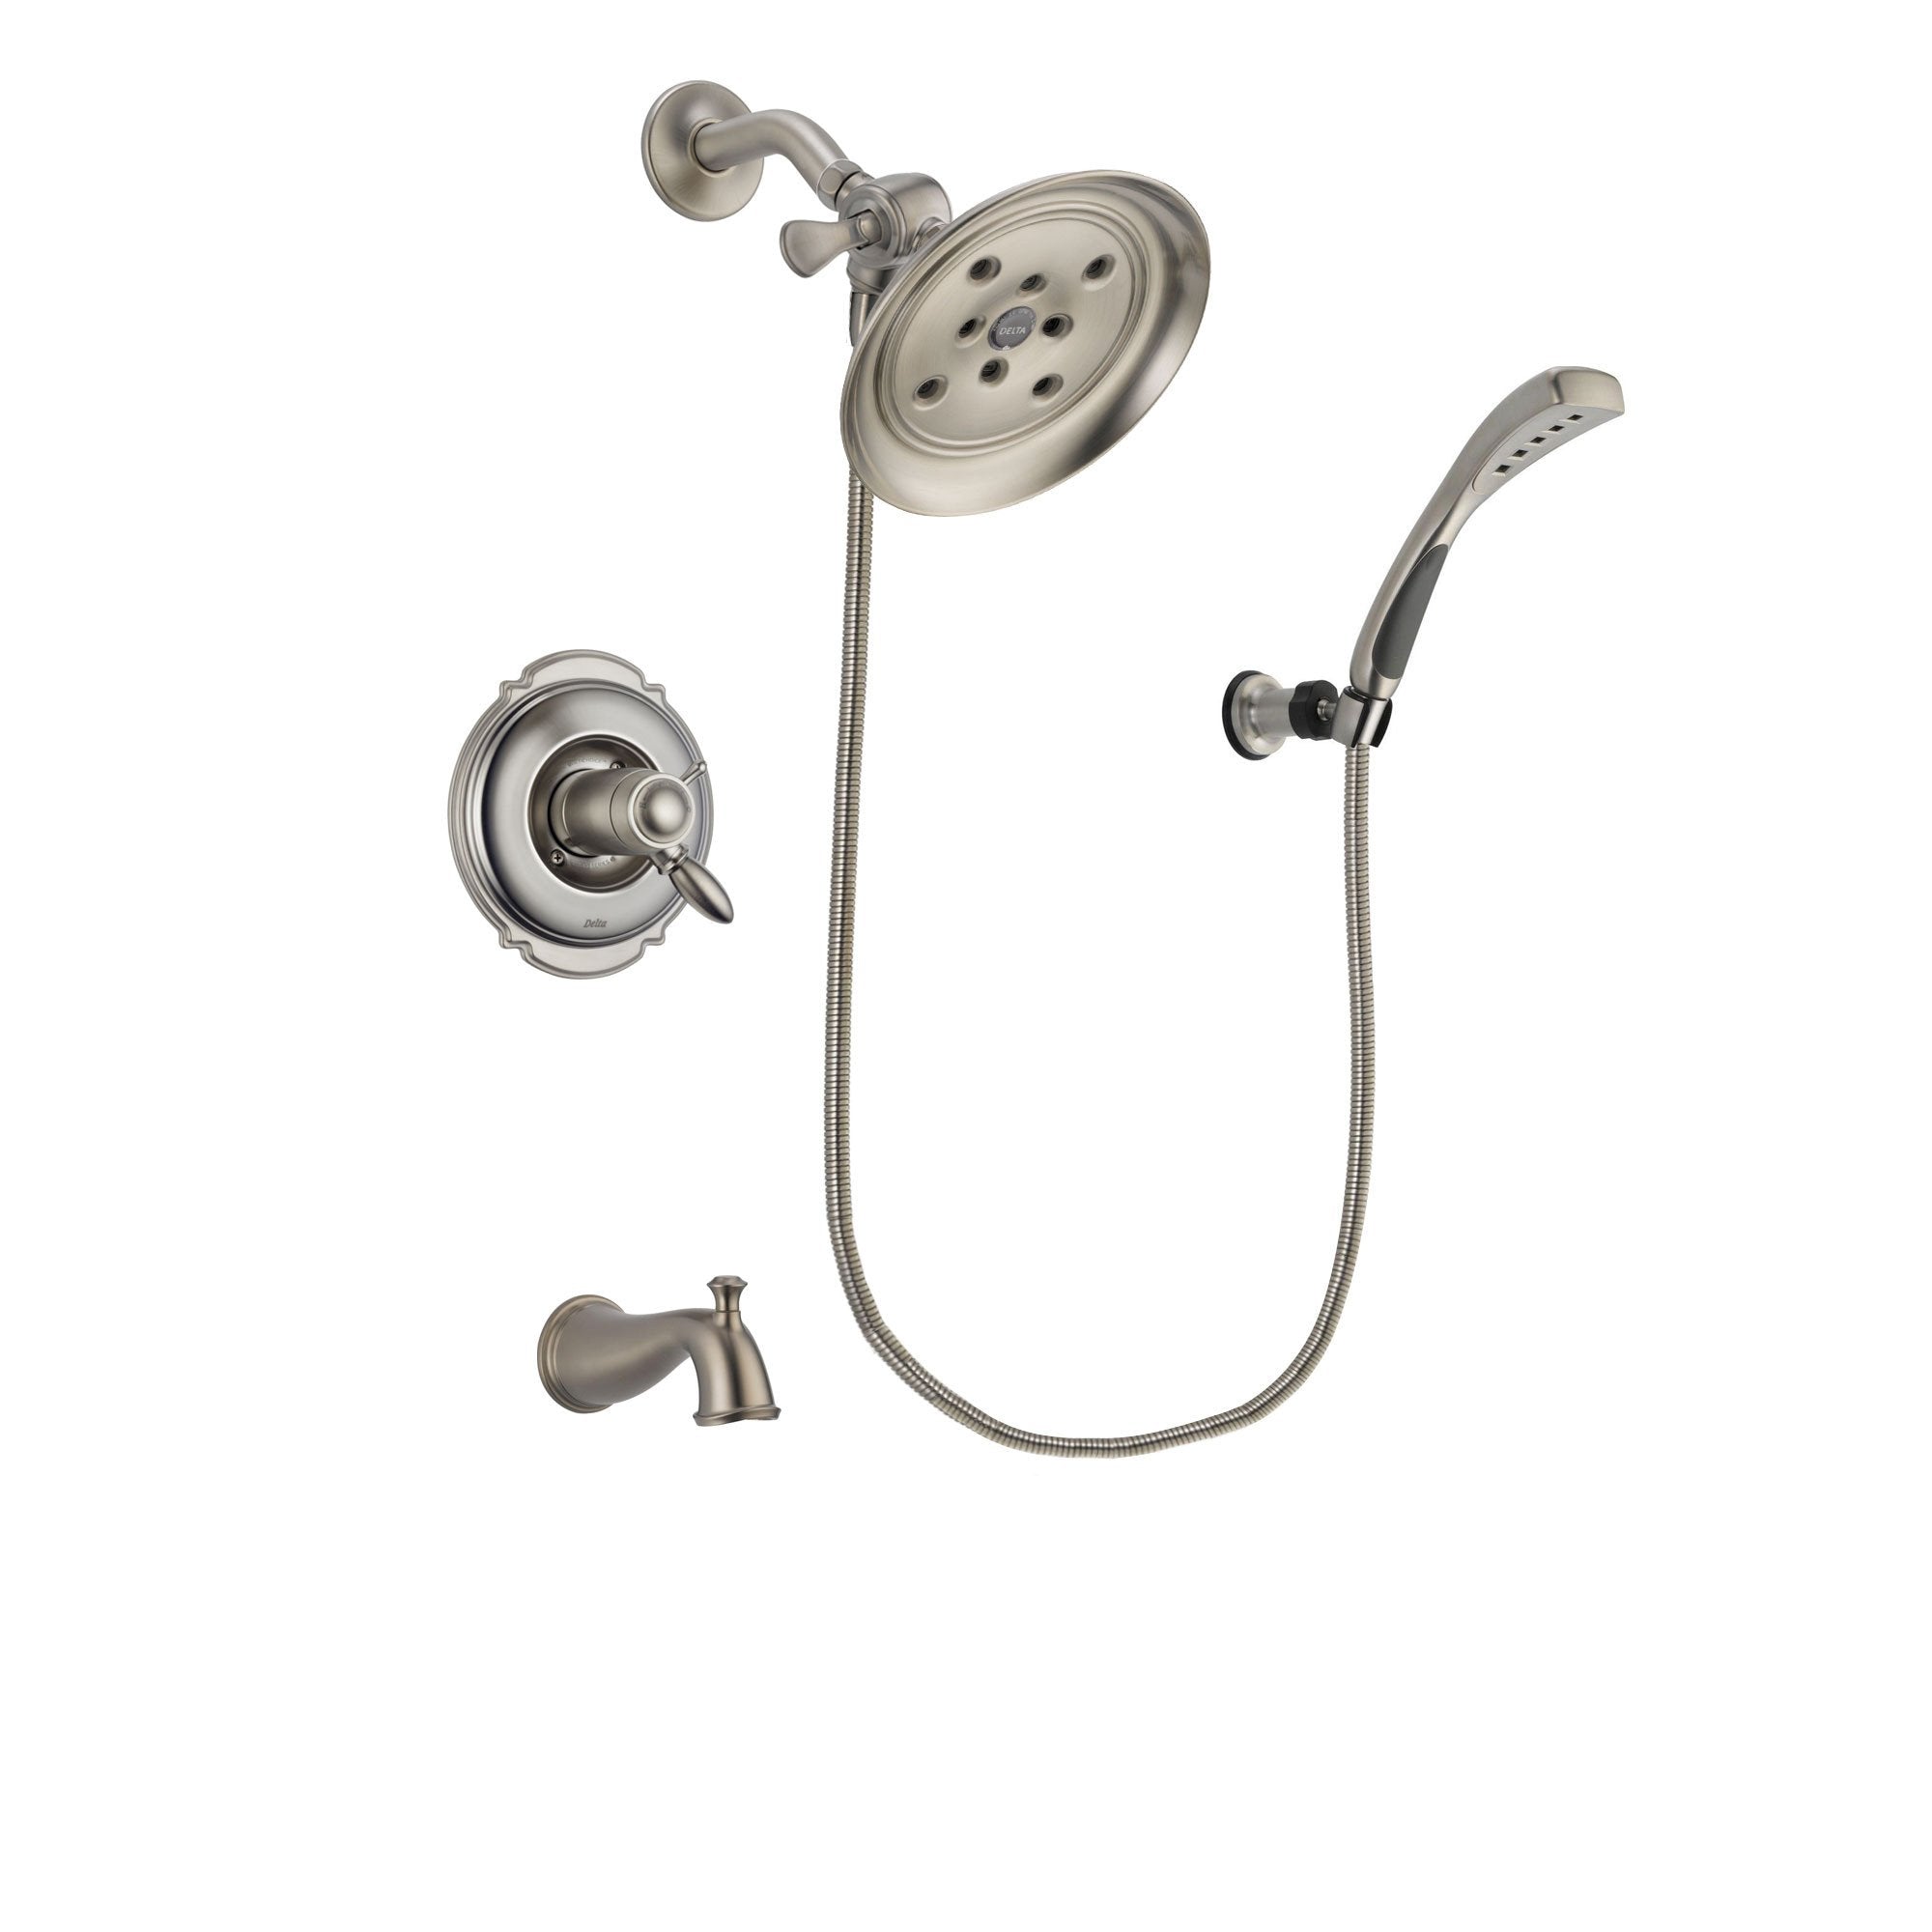 Delta Victorian Stainless Steel Finish Thermostatic Tub and Shower Faucet System Package with Large Rain Showerhead and Wall Mounted Handshower Includes Rough-in Valve and Tub Spout DSP1855V